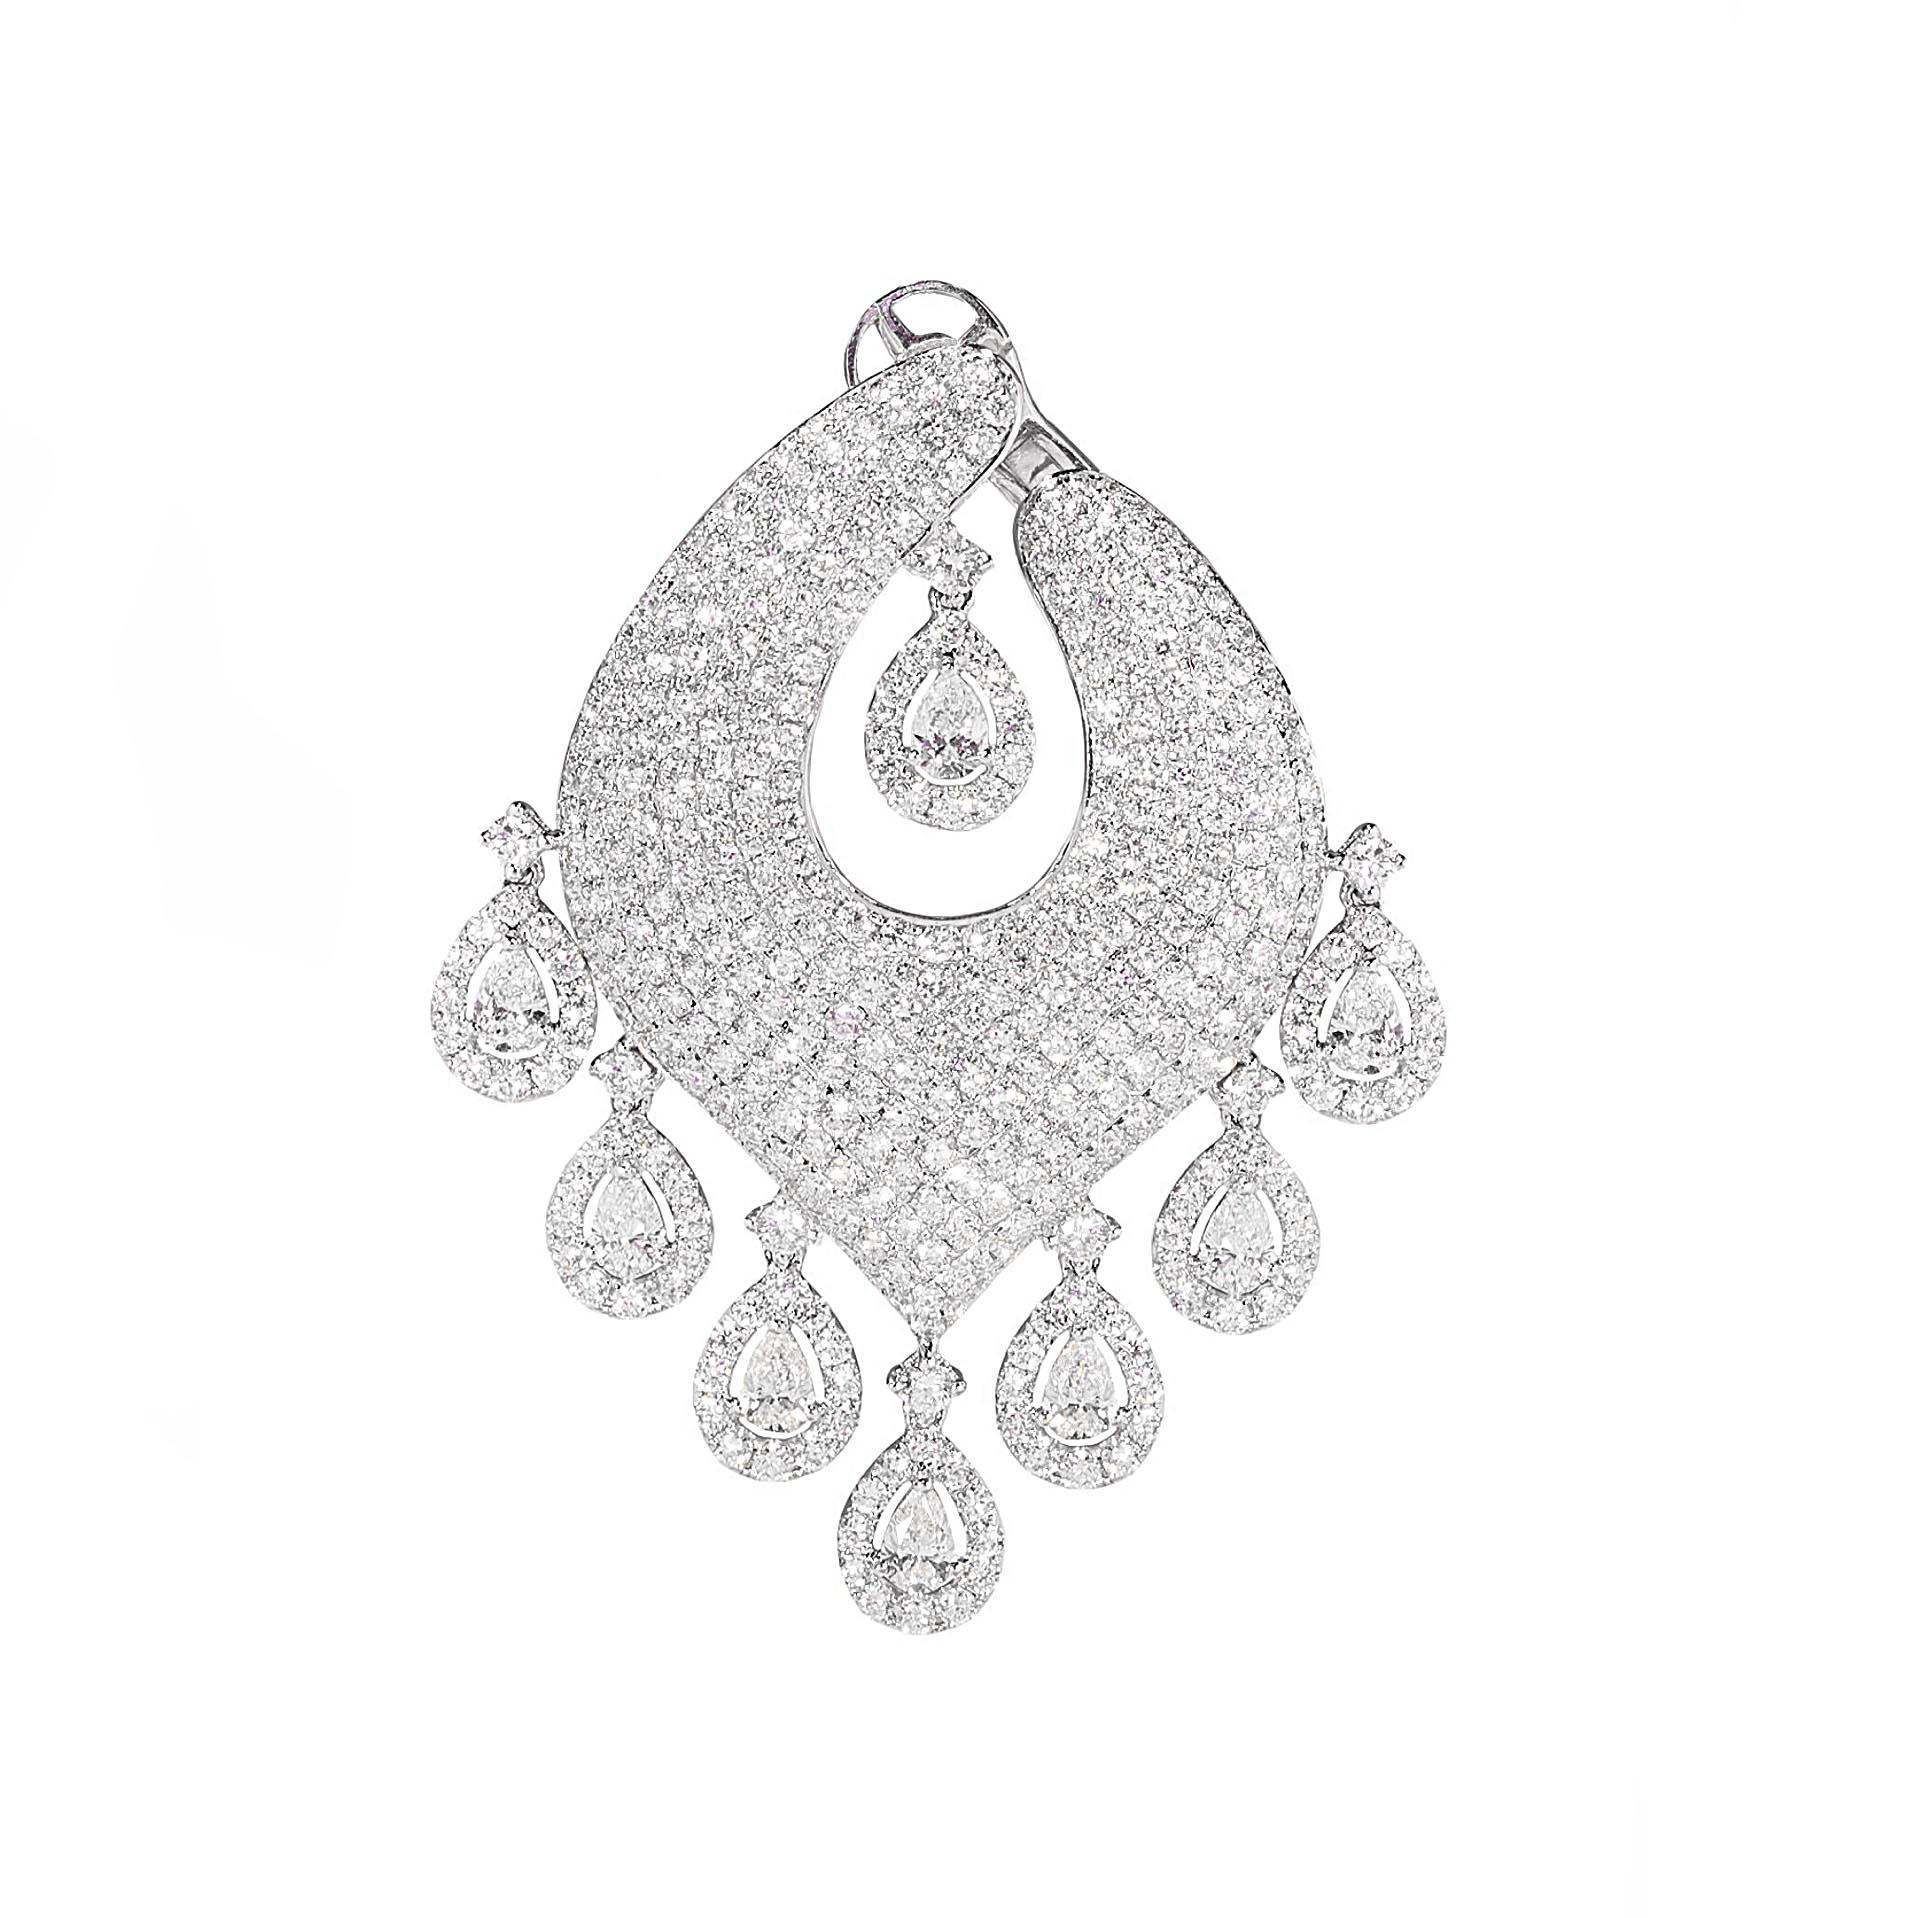 These hand made chandelier and diamond dangle earrings are crafted in 18 karat white gold. The total diamond weight in the earrings are 14.01 carats. There are 16 dangling pear shapes weighing a total of 3.19 carats. Each stone is surrounded by a